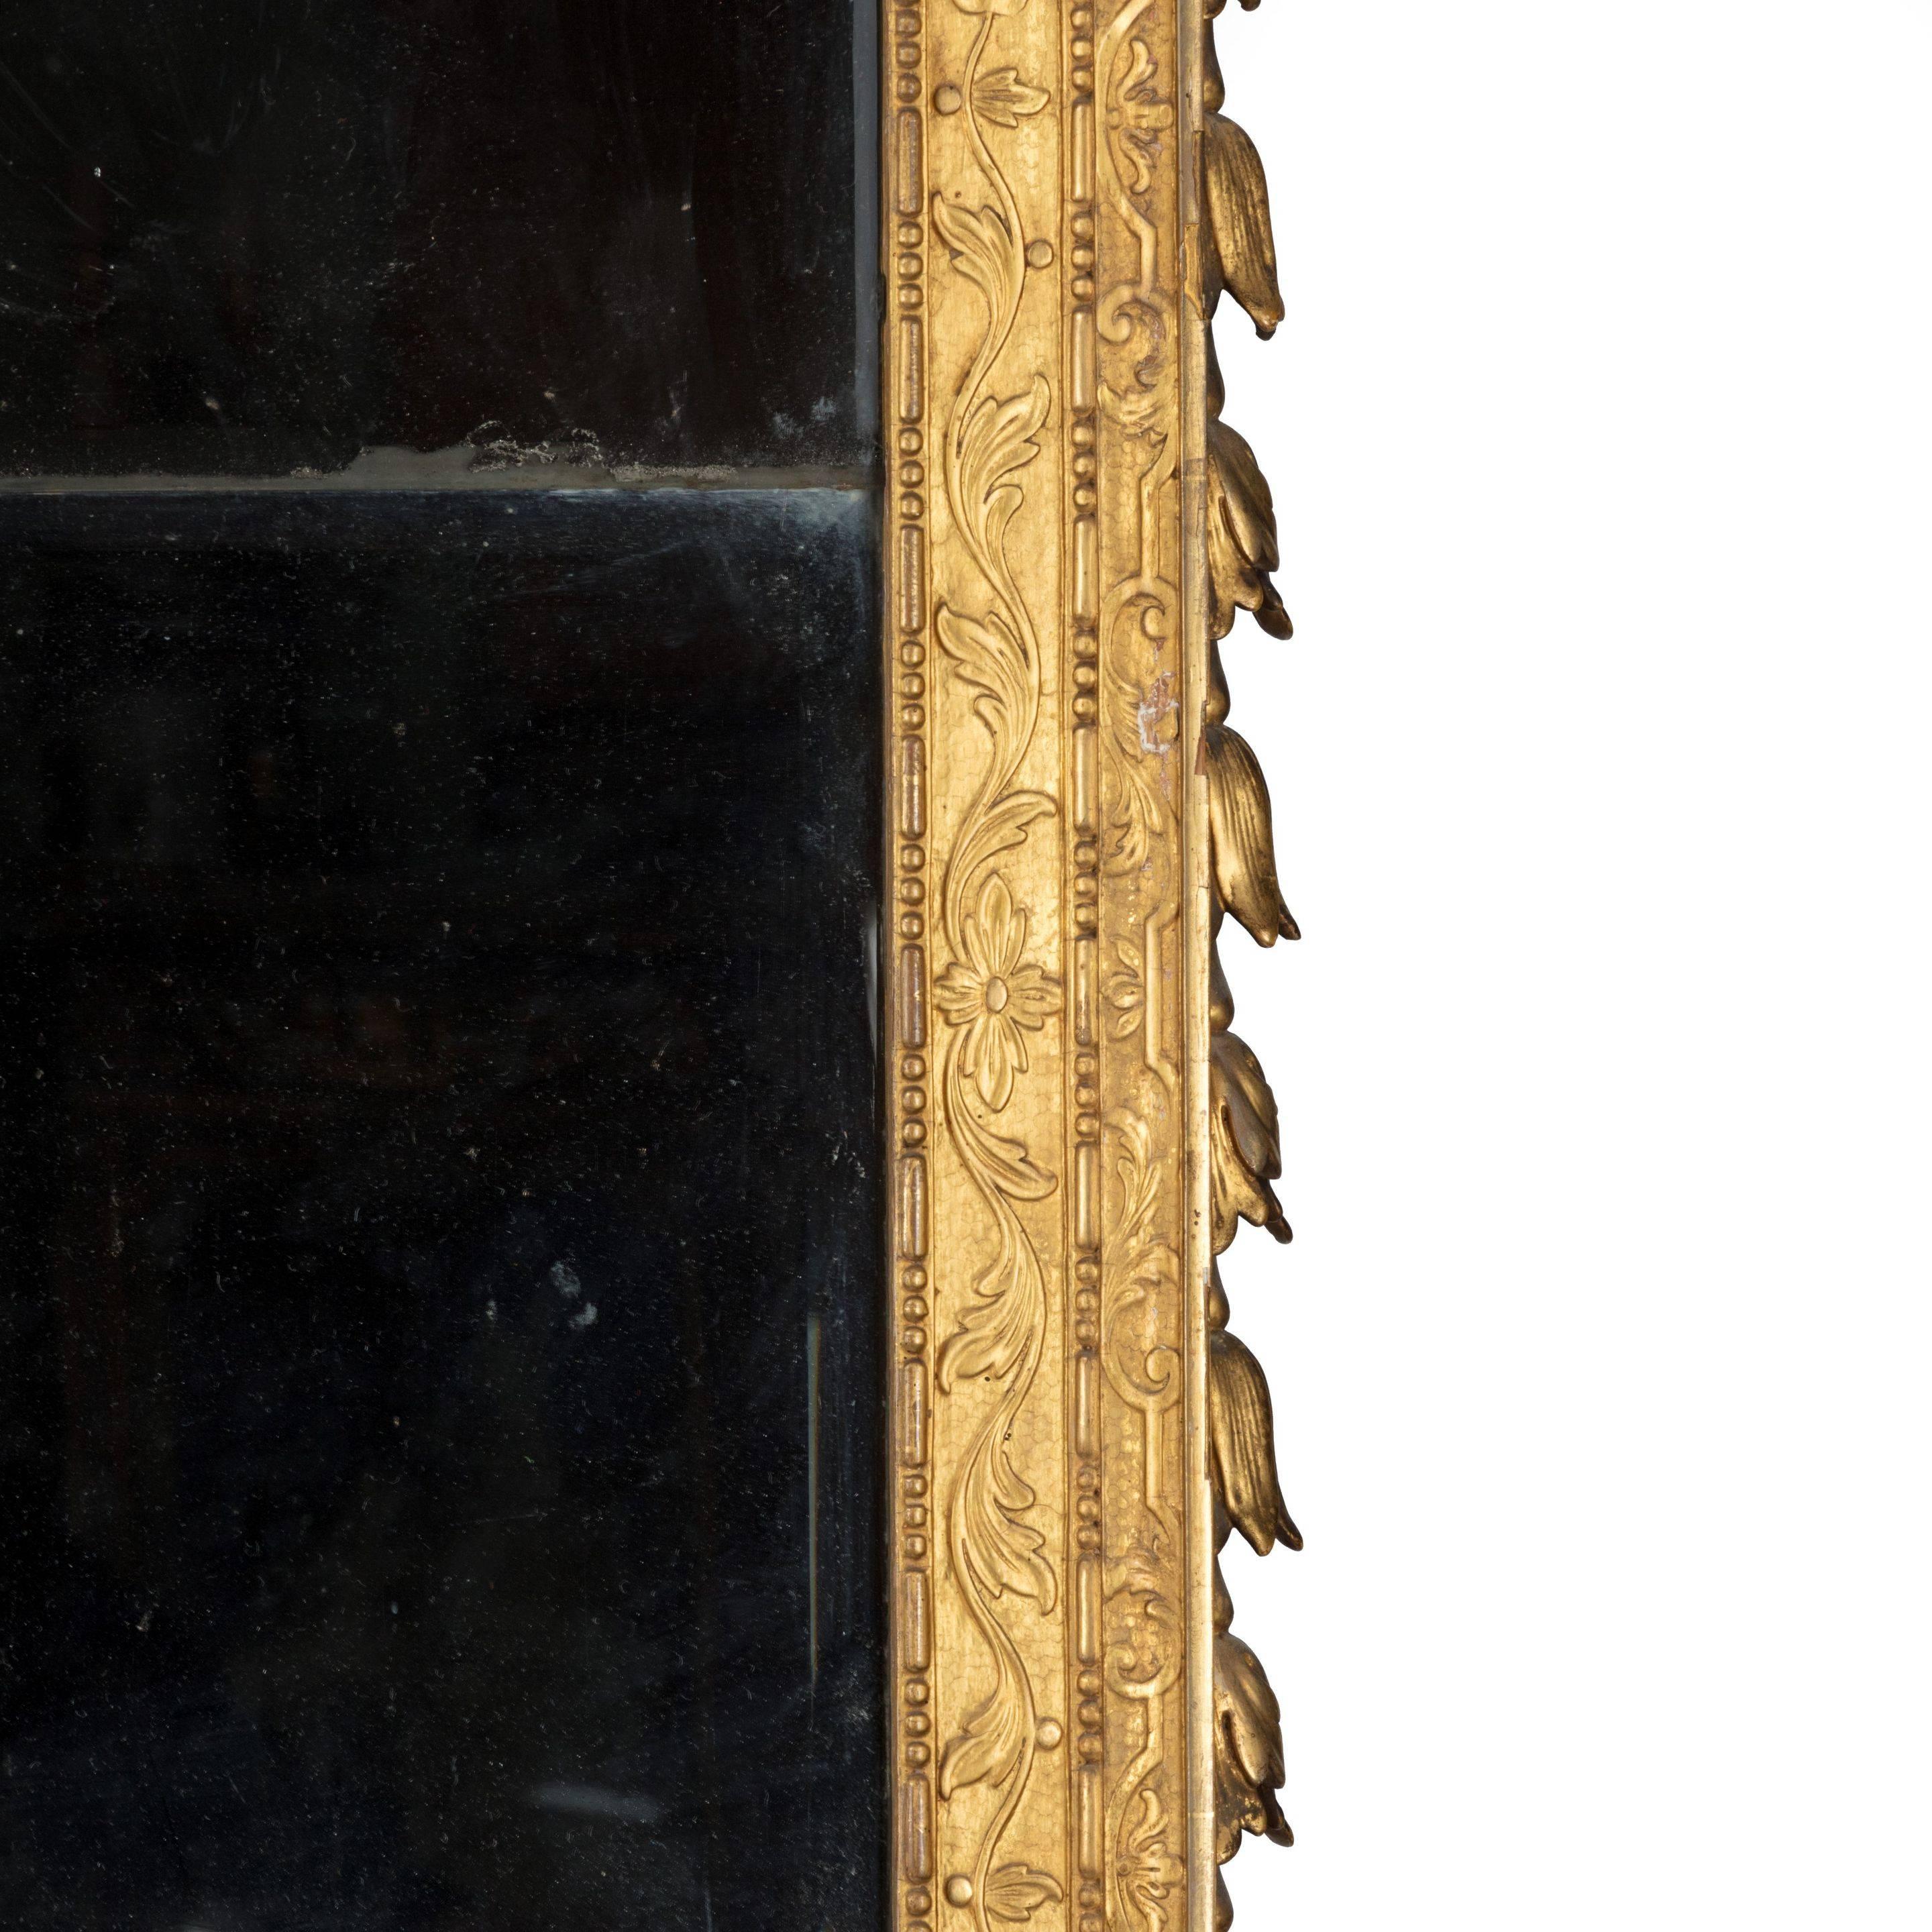 An elegant Victorian giltwood mirror after a design by William Kent, of slender rectangular form, decorated with both high relief and shallow carving, the broken pediment comprising a central cartouche flanked by two scrolls with trailing flower